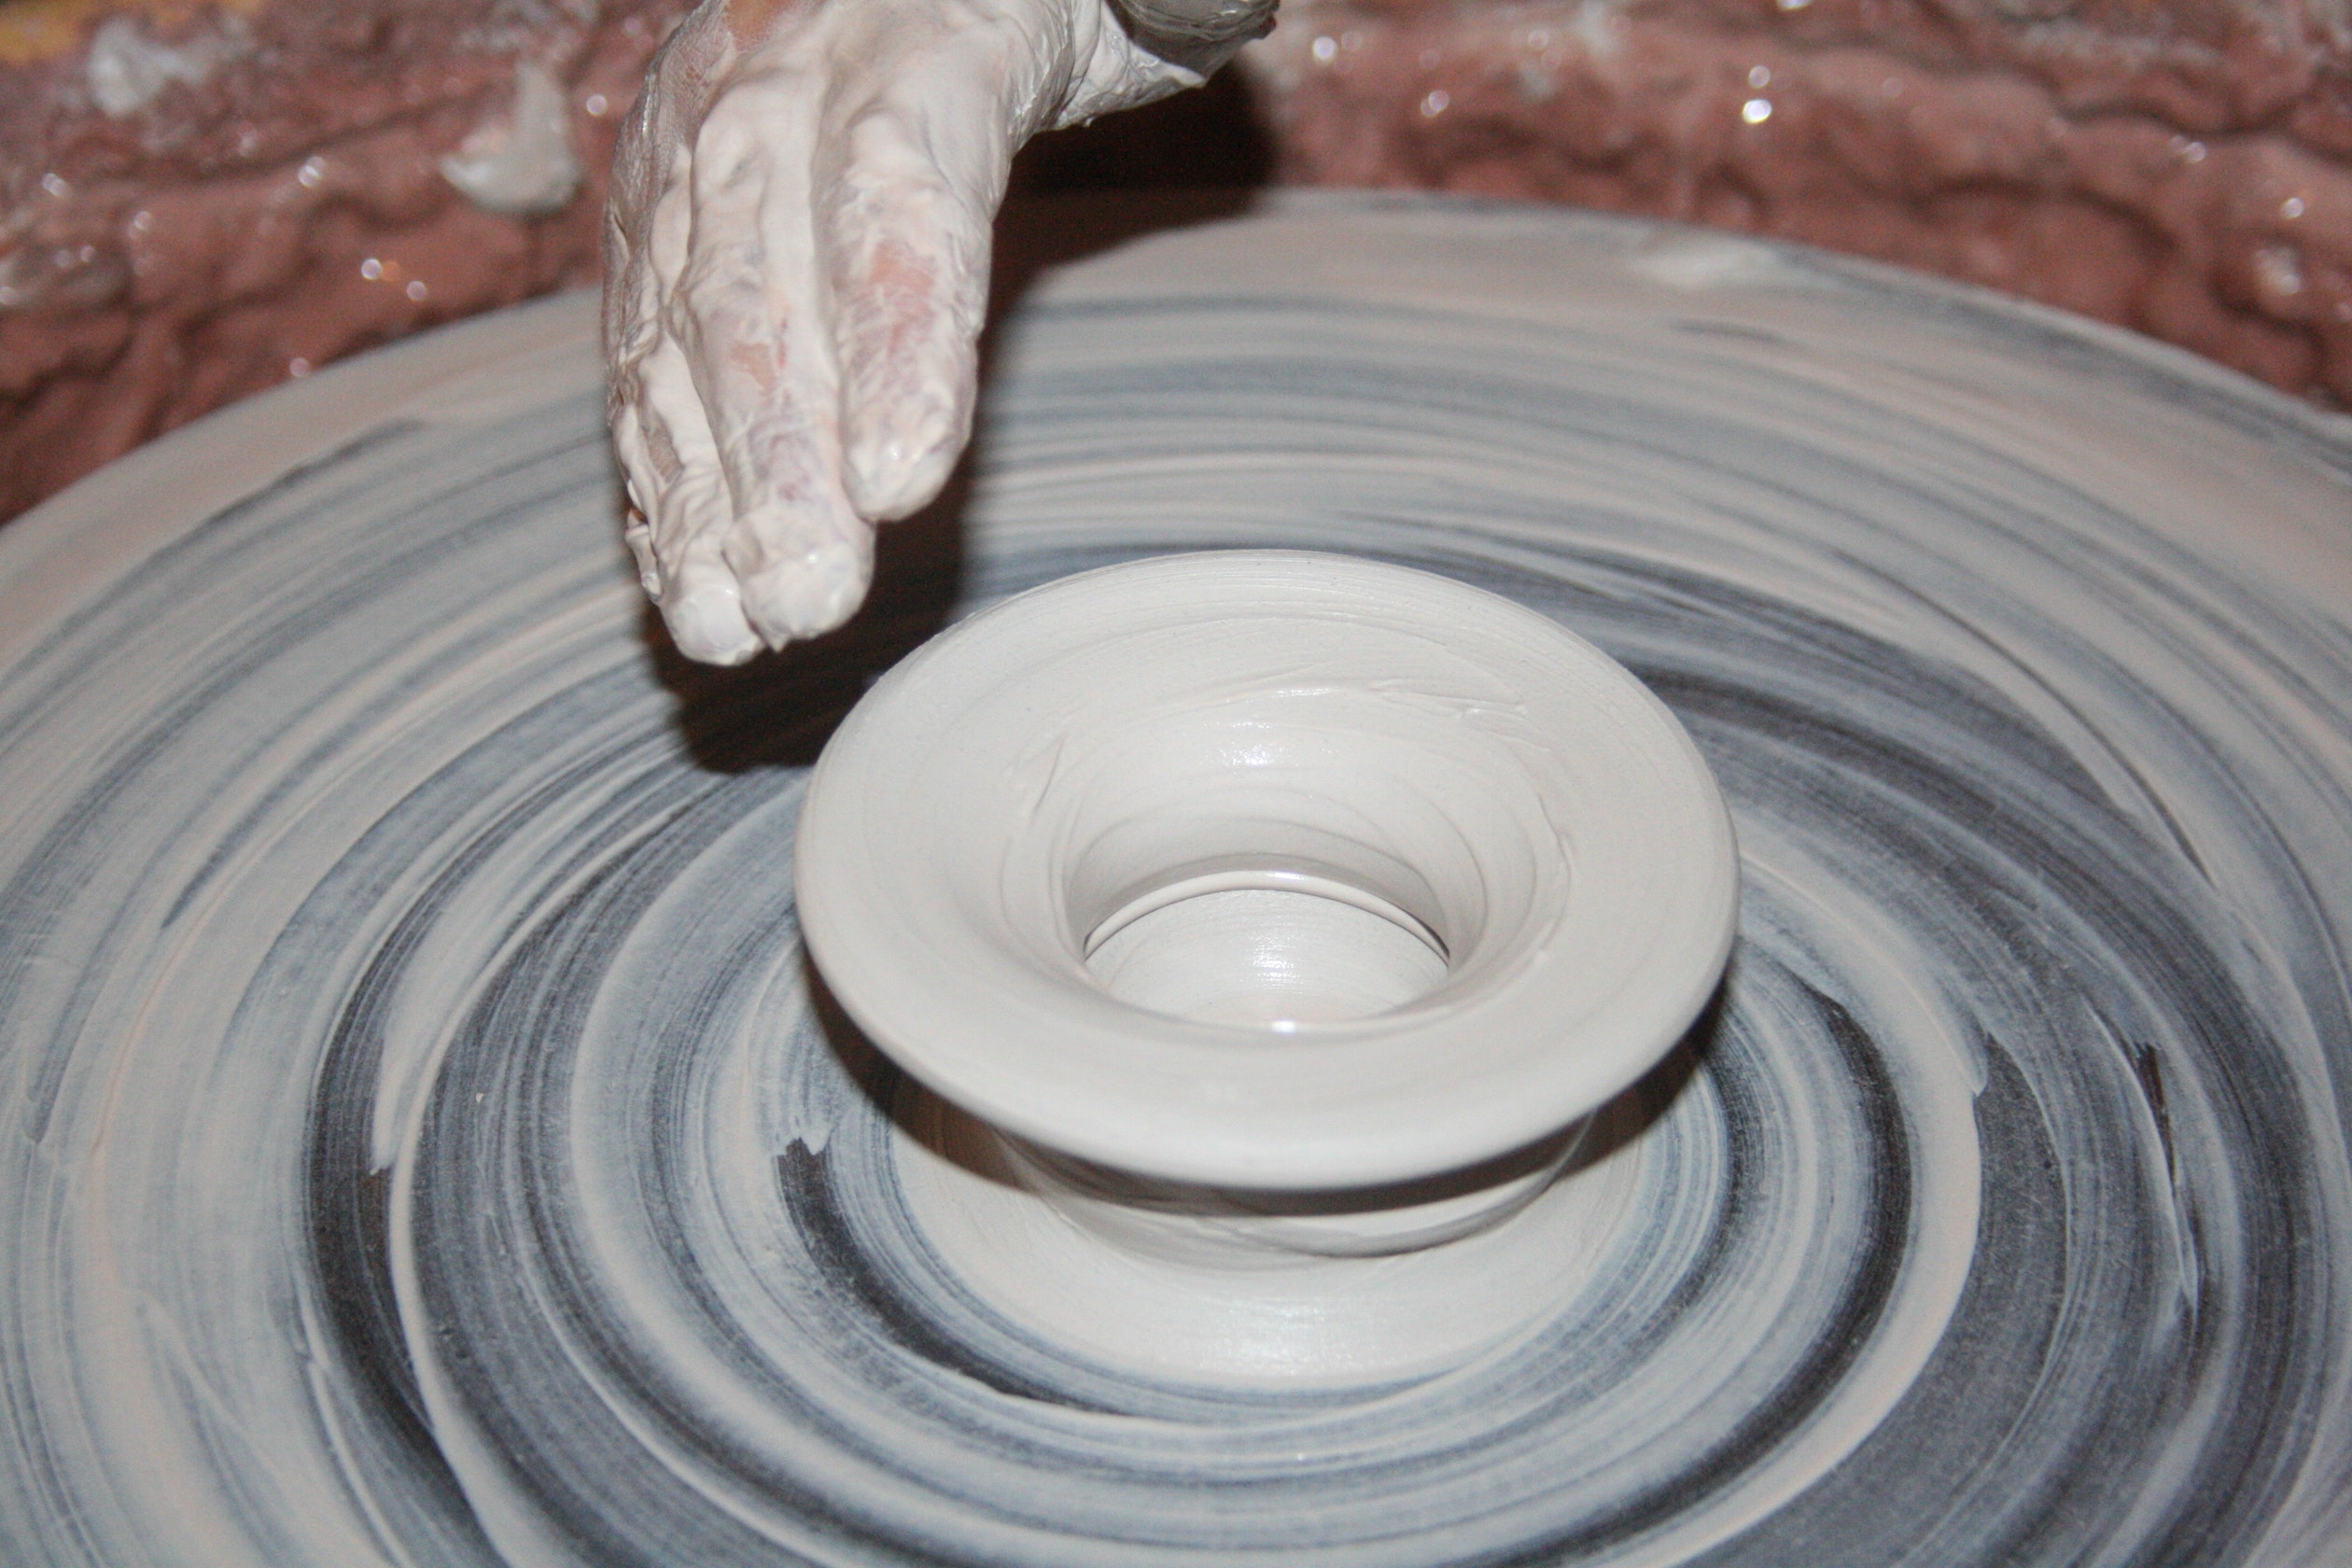 Clay shaping